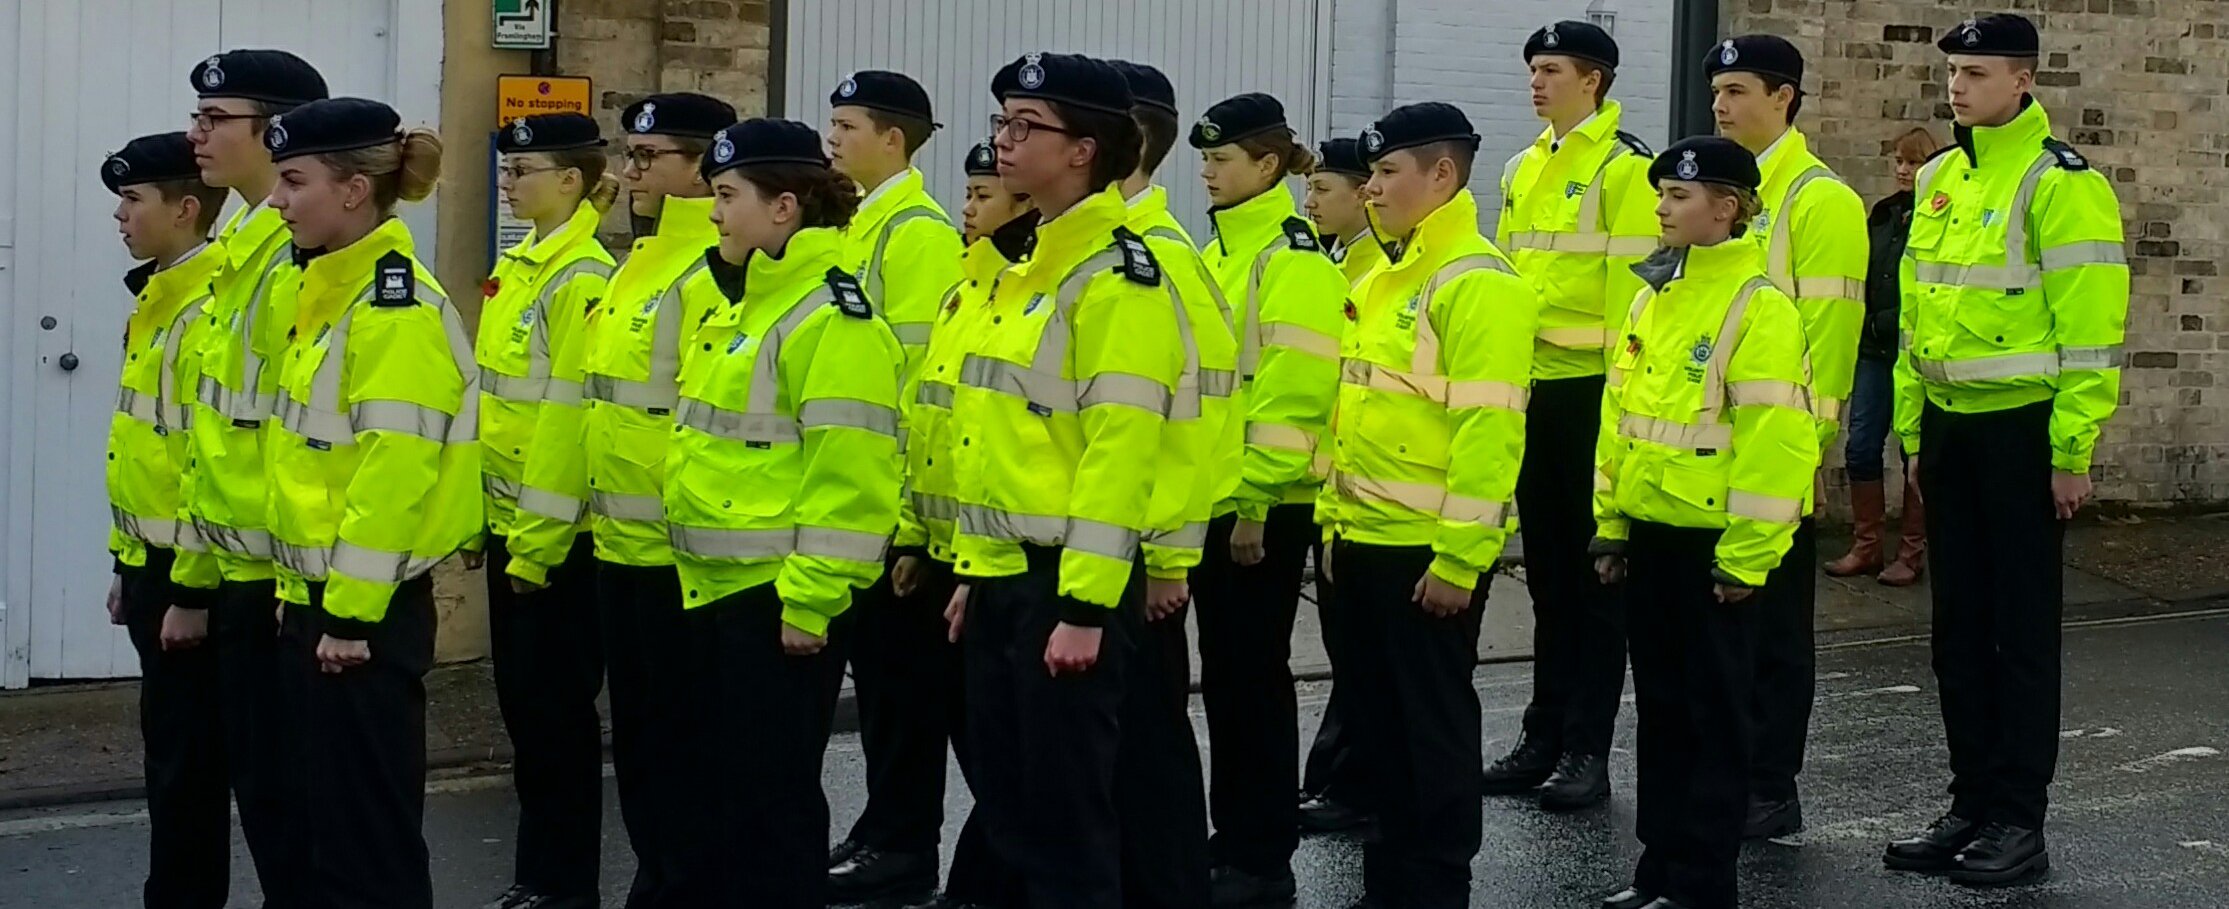 Suffolk Police / Emergency Services Cadets